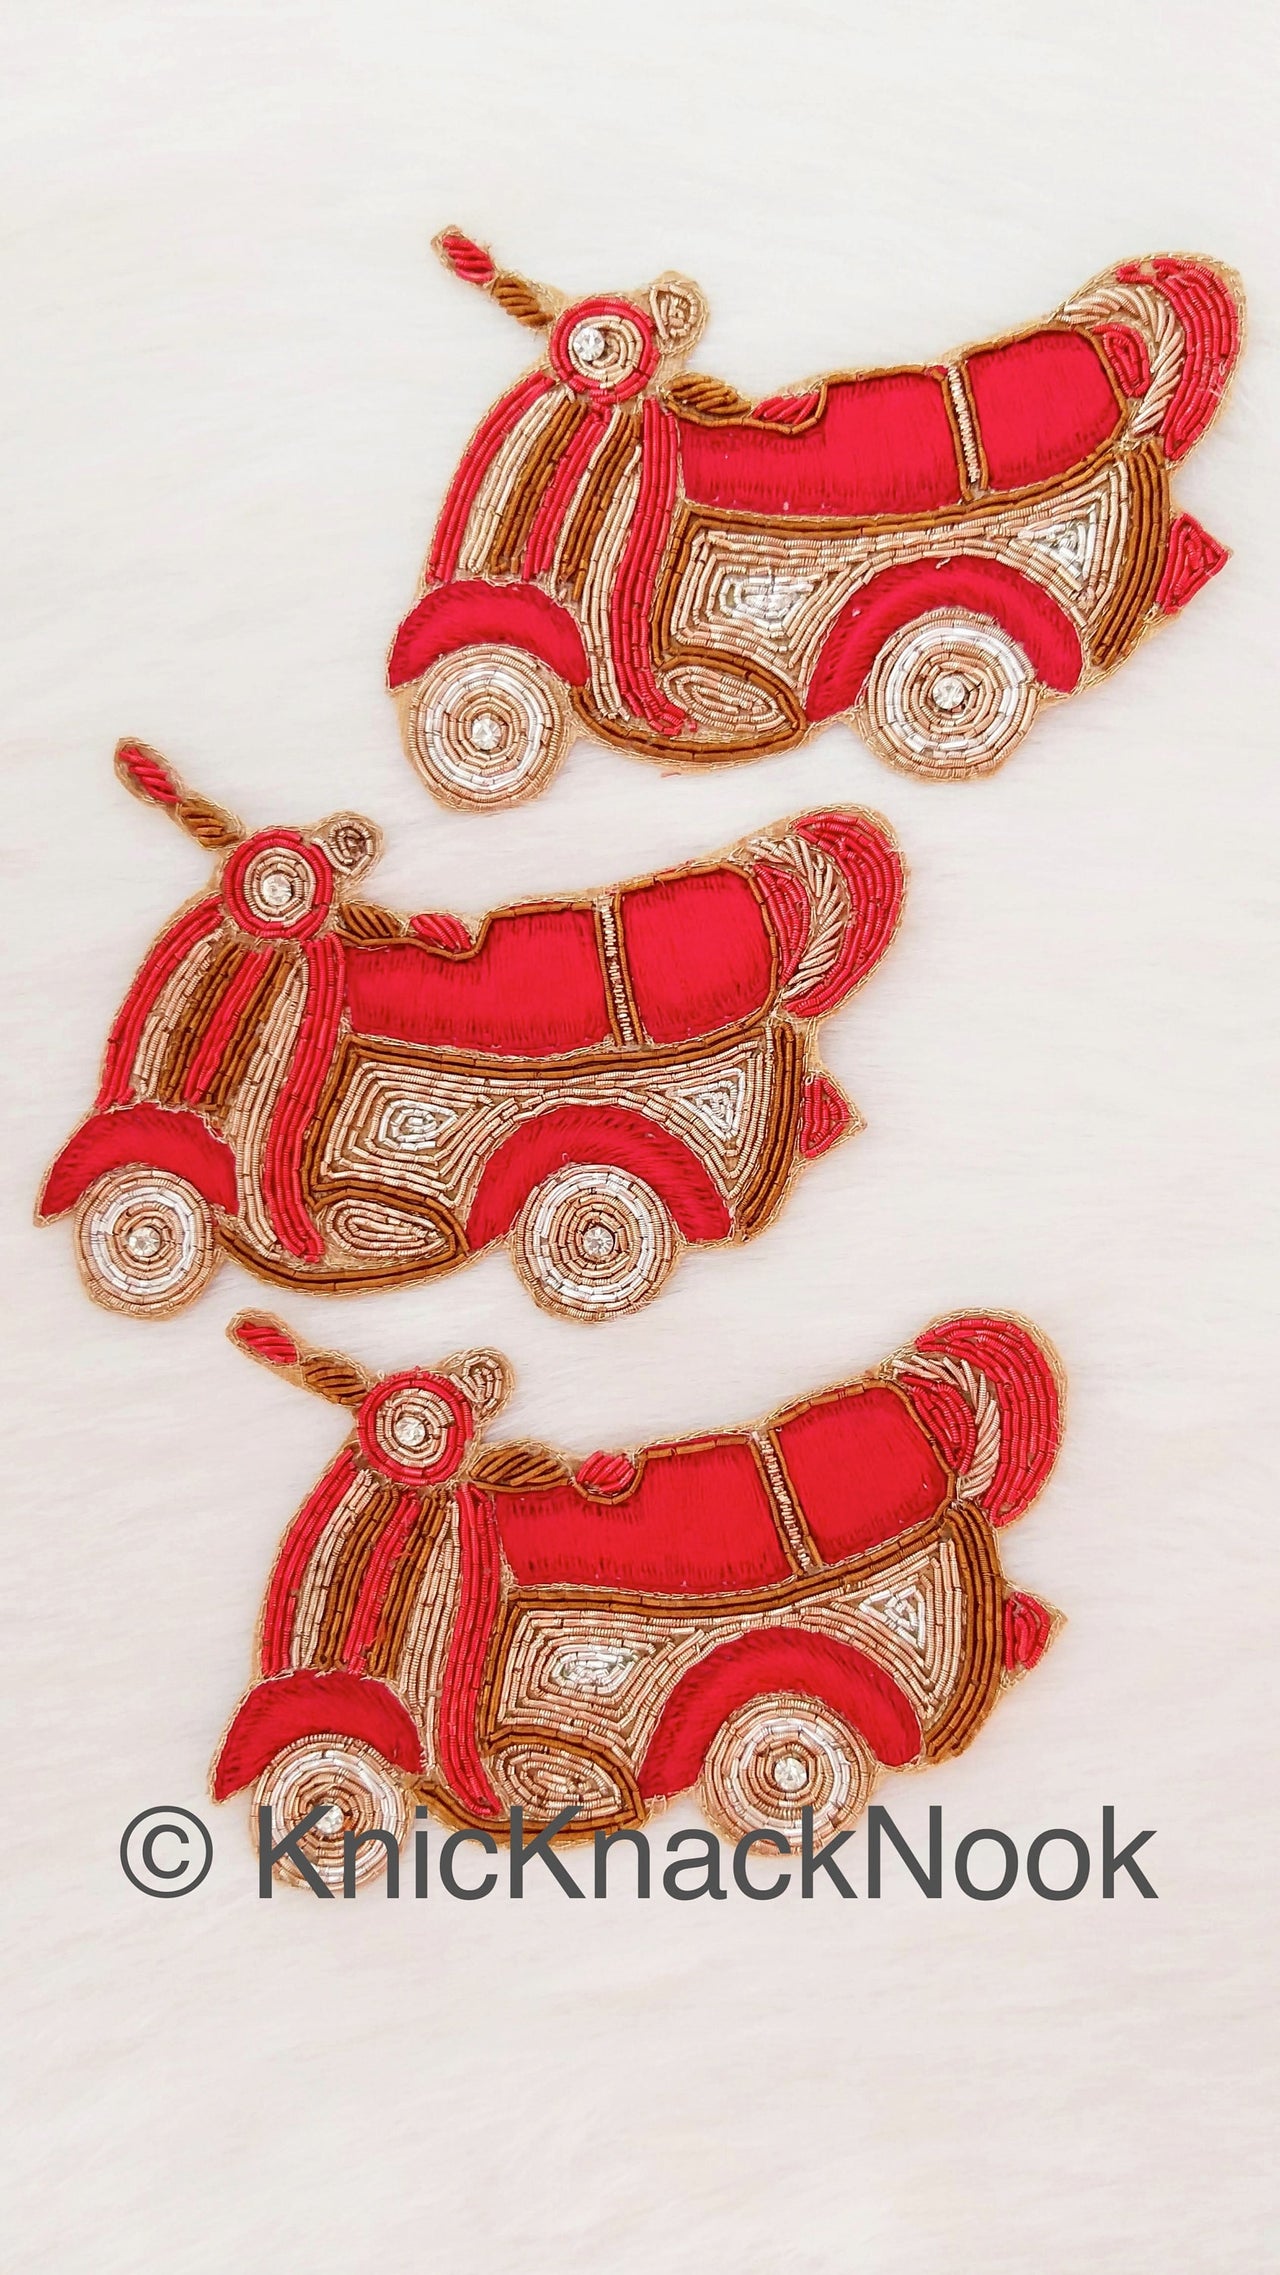 Hand Embroidered Motor Scooter Applique In Red, Gold And Silver Zardozi Threadwork, Motorcycle Motif